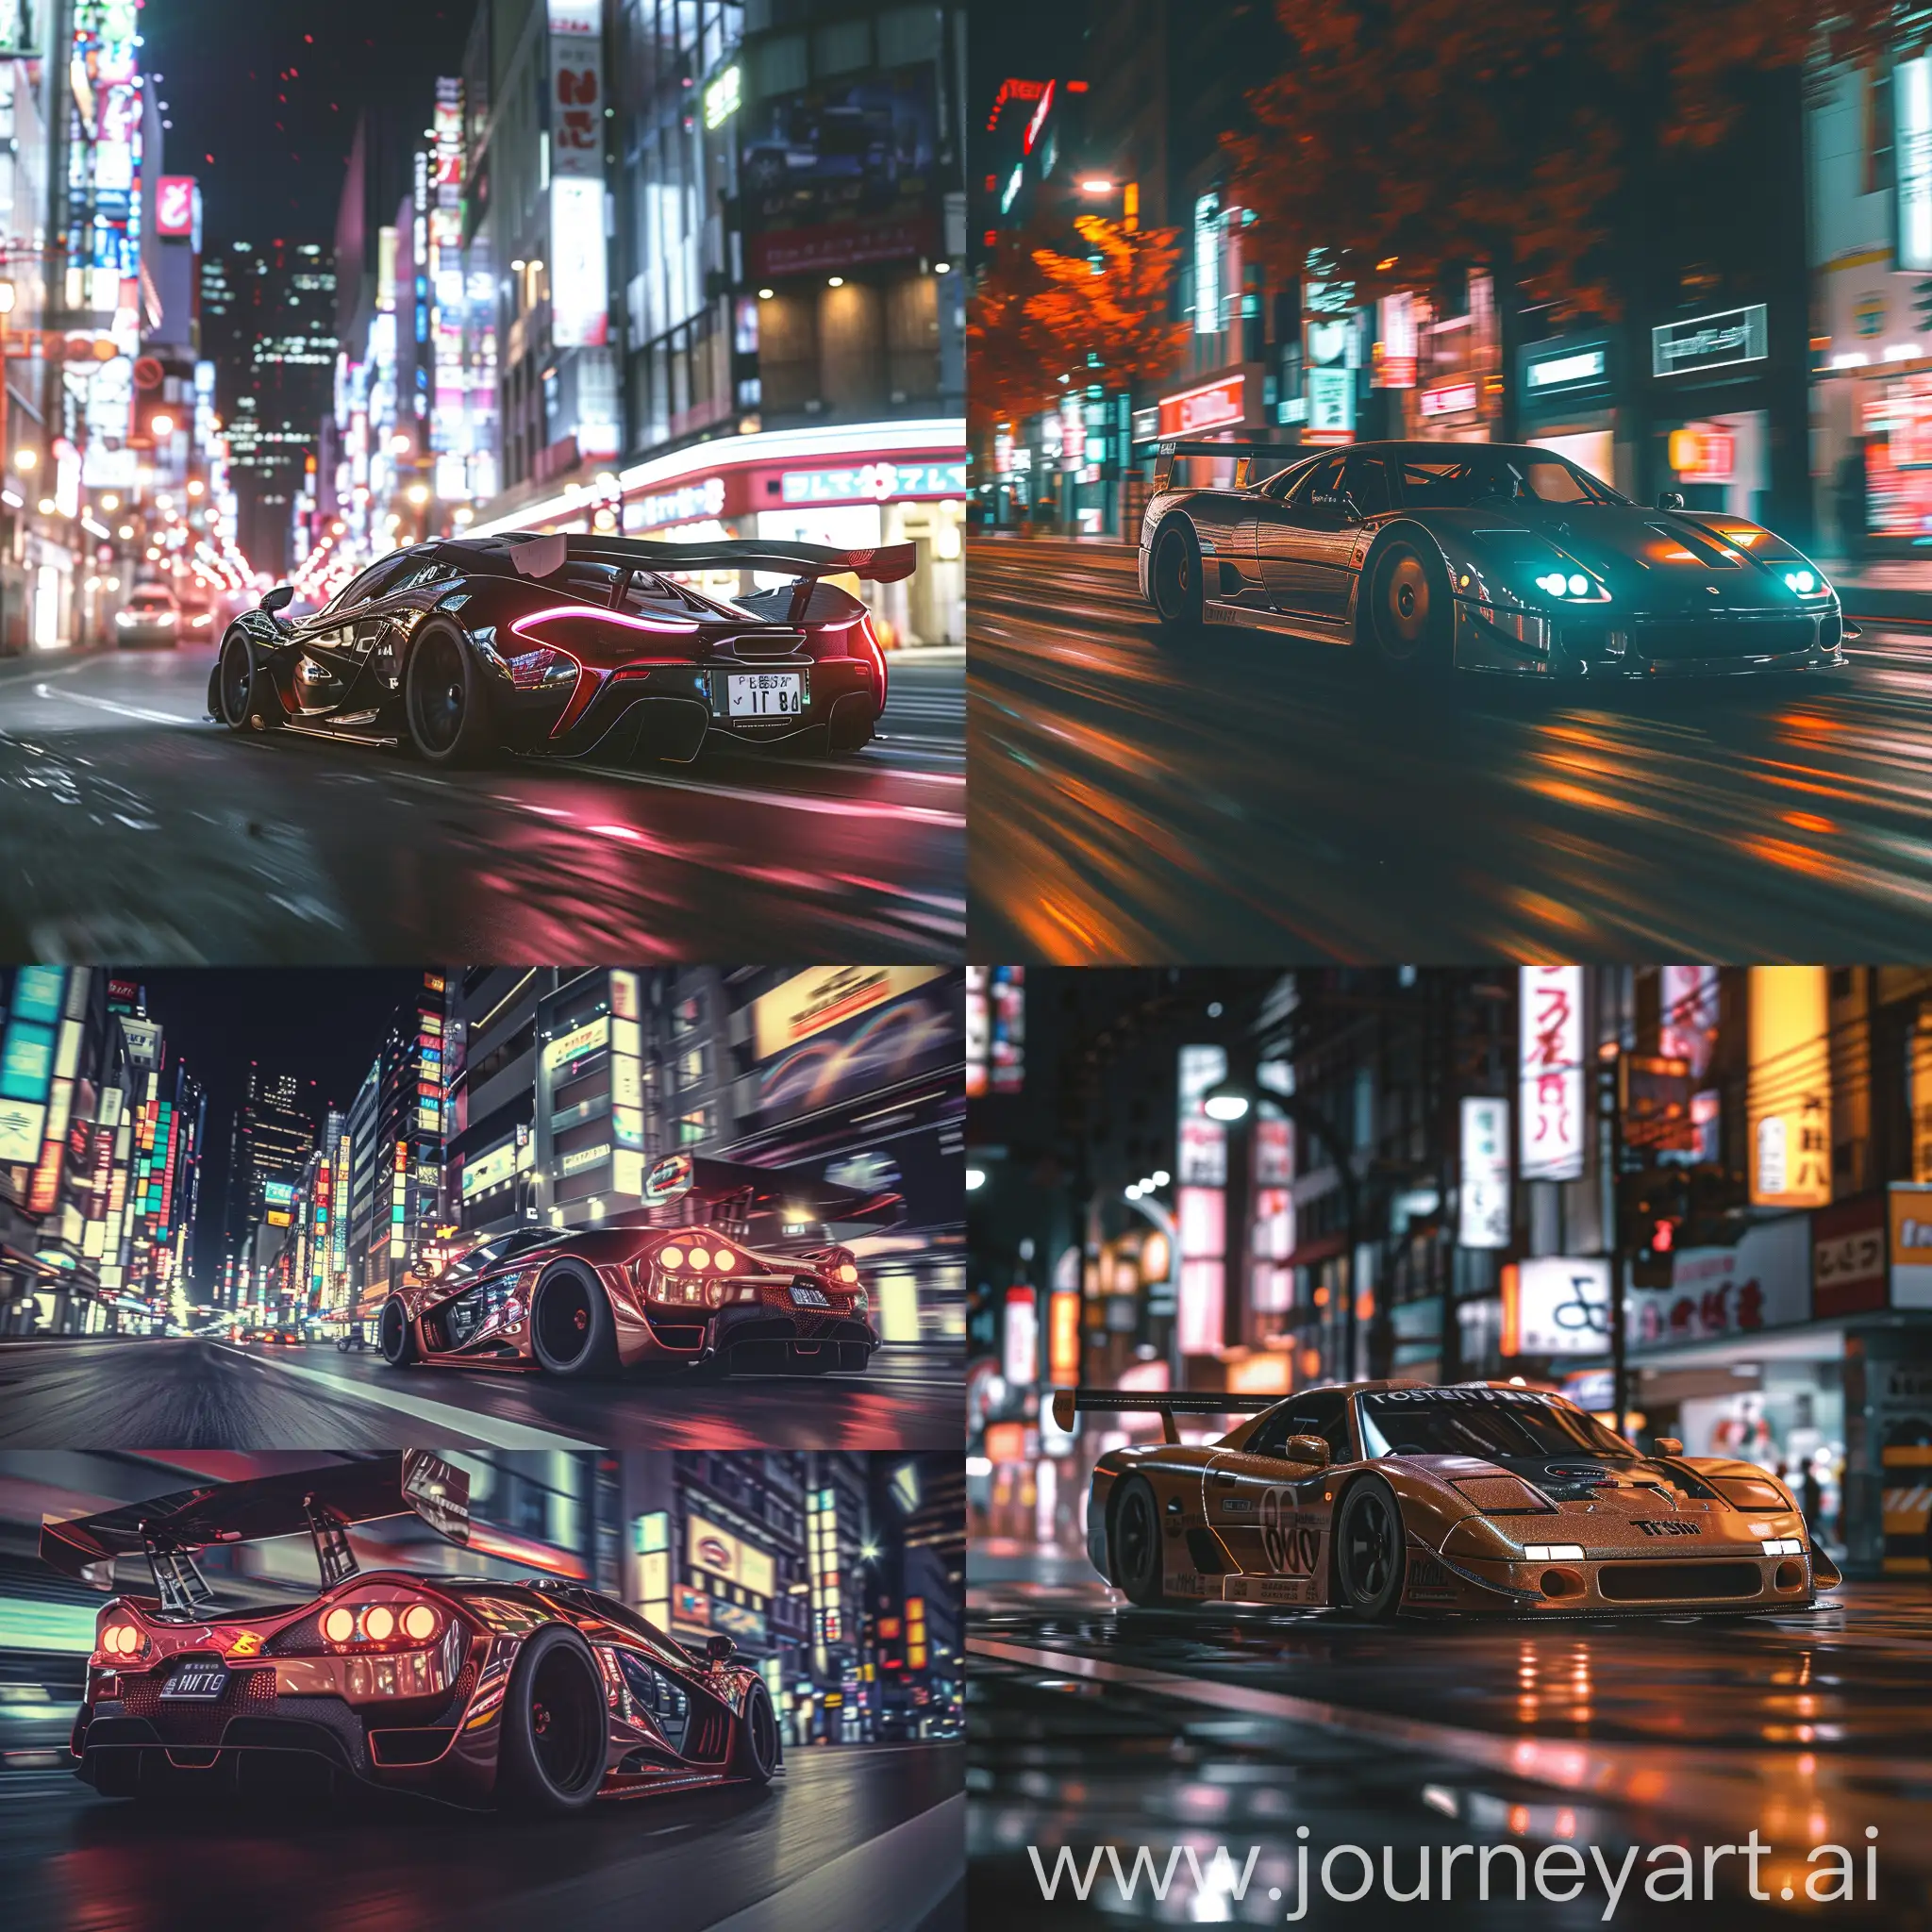 Epic-Realism-Cinematic-Shot-of-Supercar-in-Illegal-Race-Through-Tokyo-Streets-at-Night